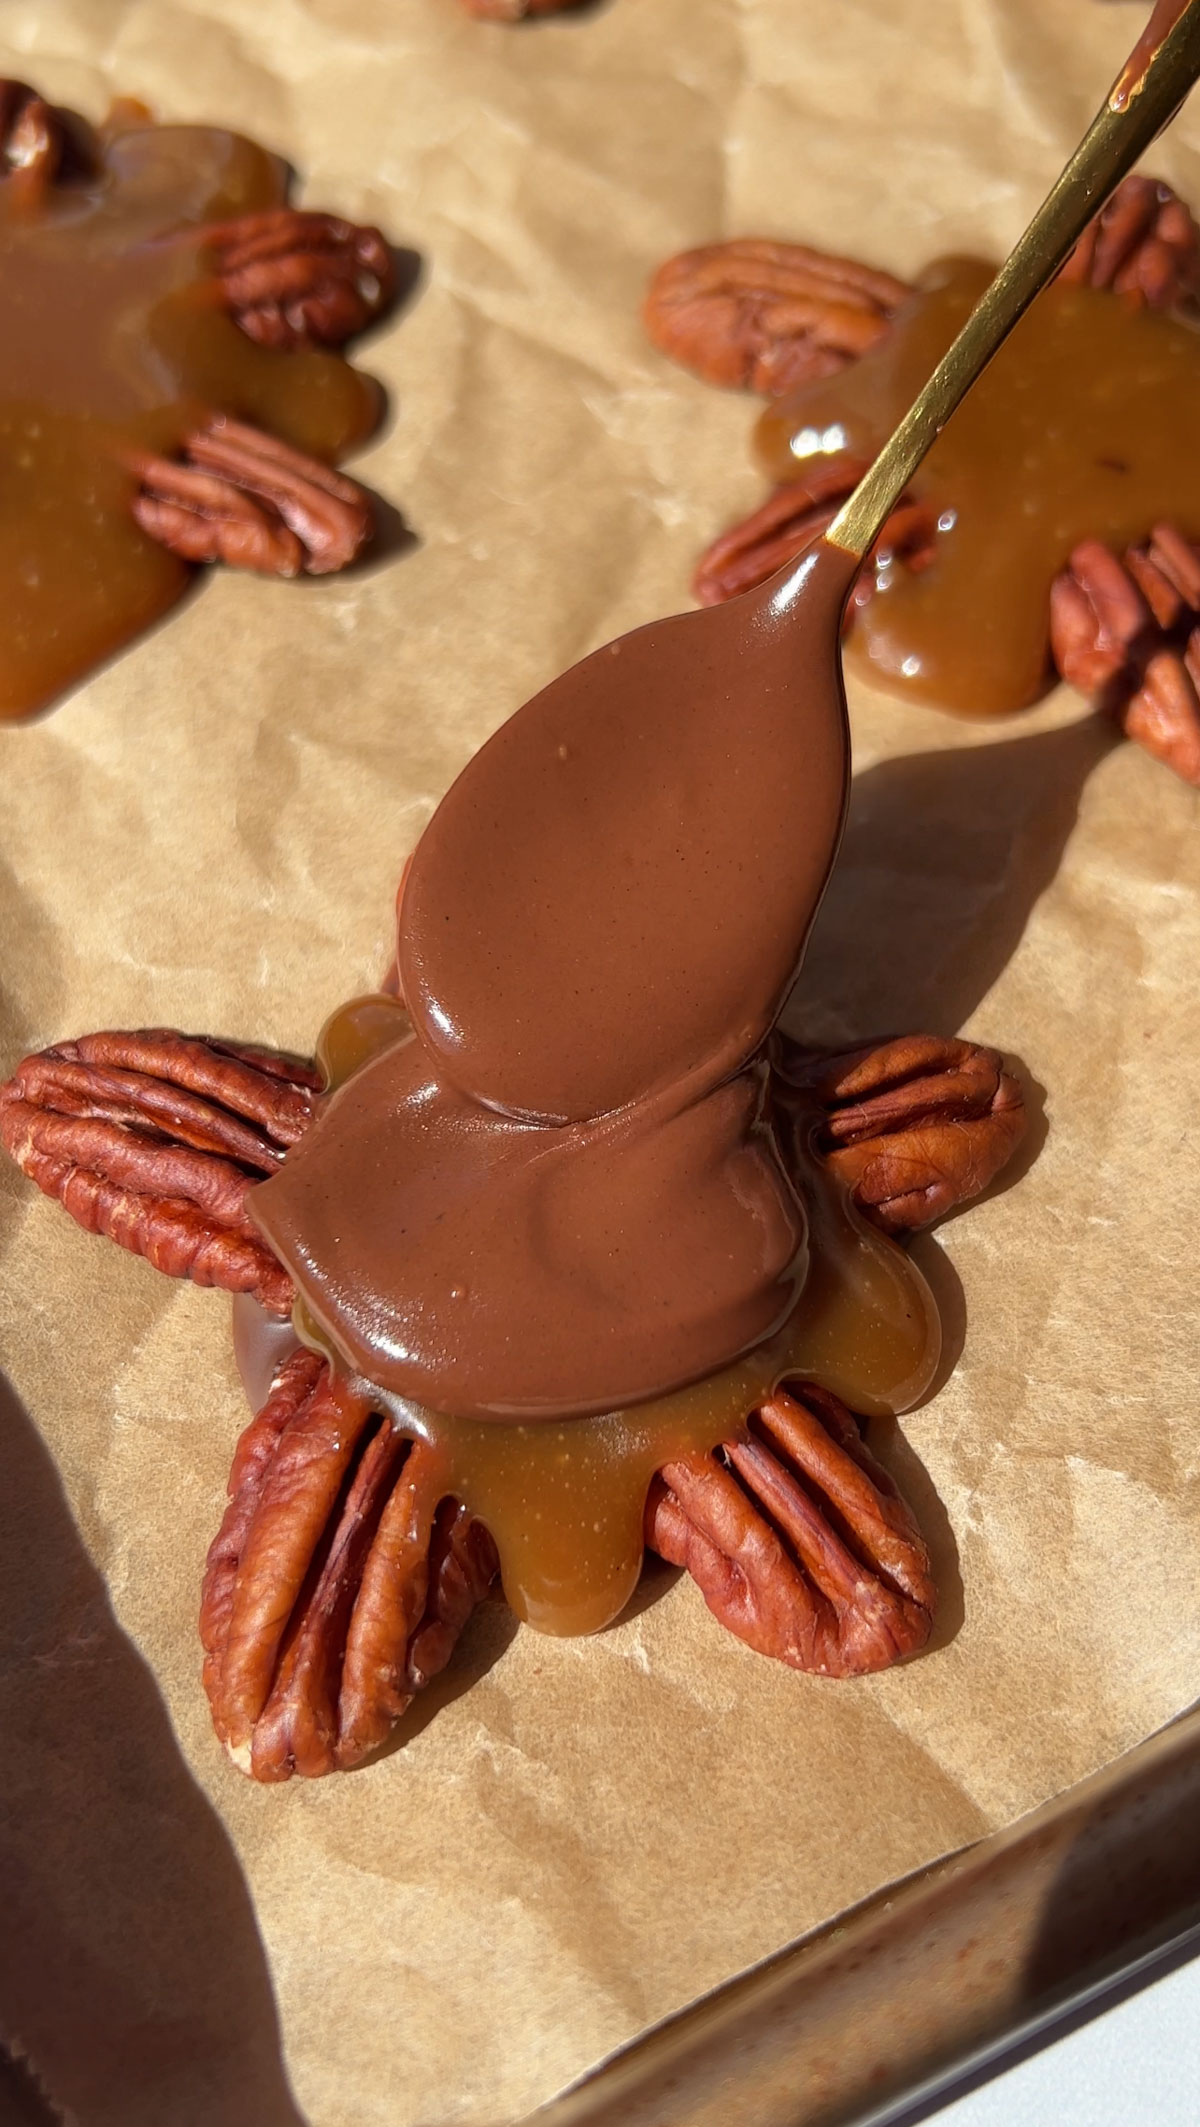 Spooning chocolate on top of the caramel and pecans.